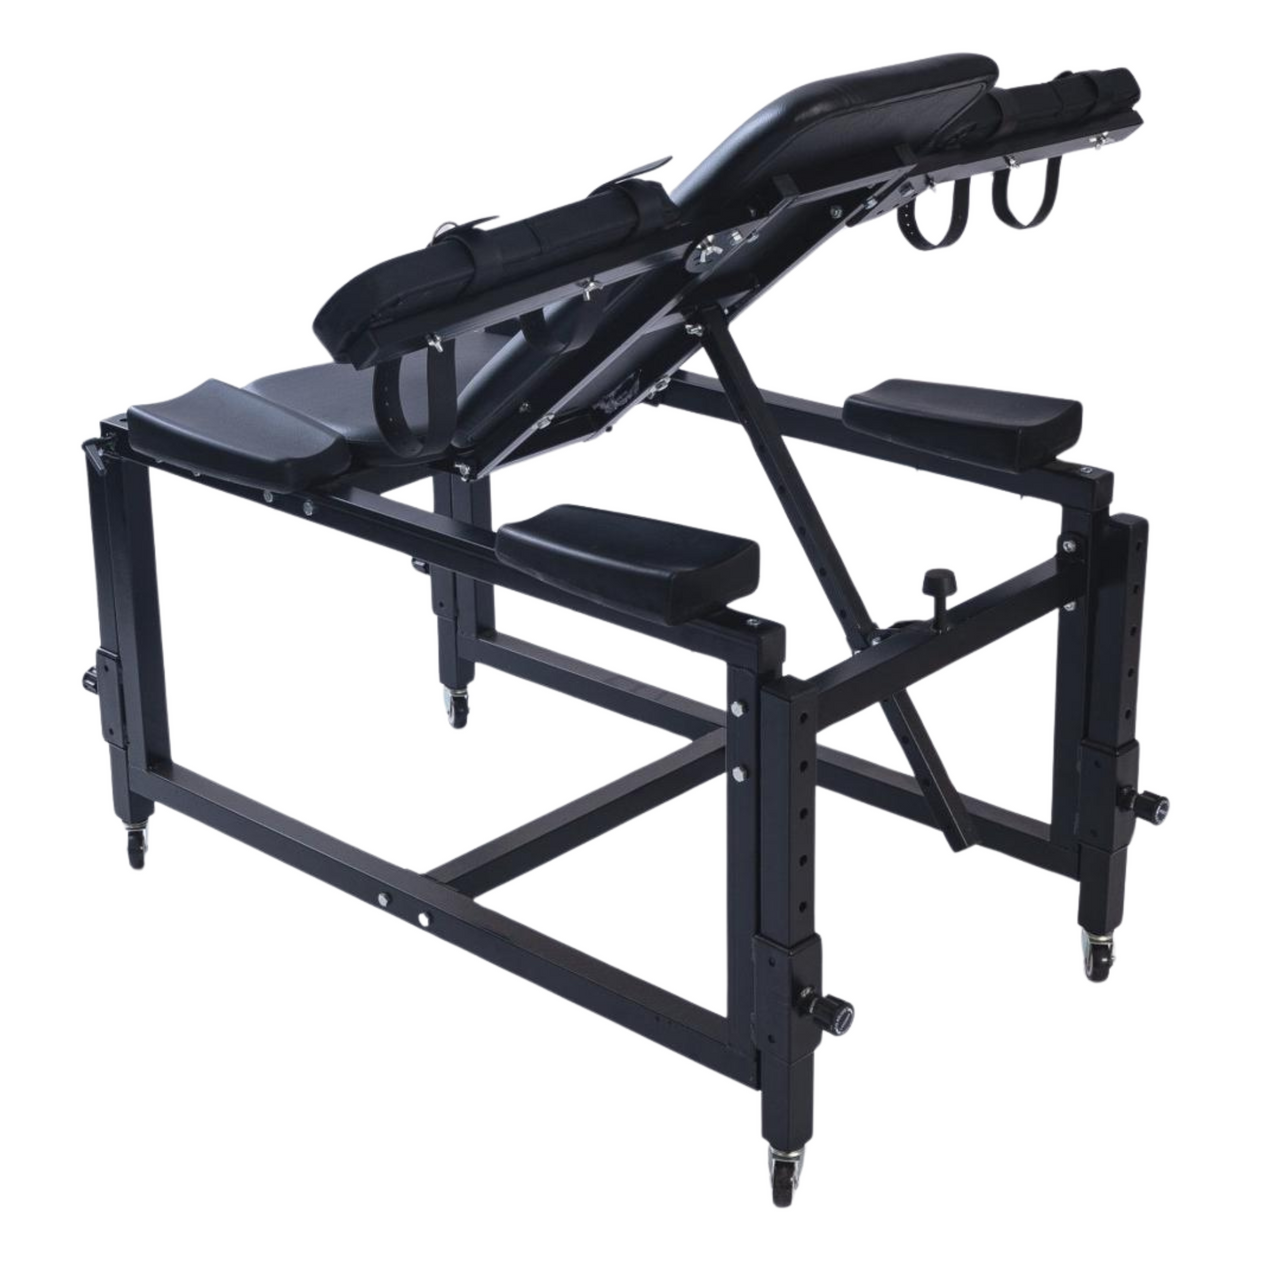 Roomsacred Gyno Chair Spanking Table Combo Fully Adjustable BDSM Sex Room Furniture